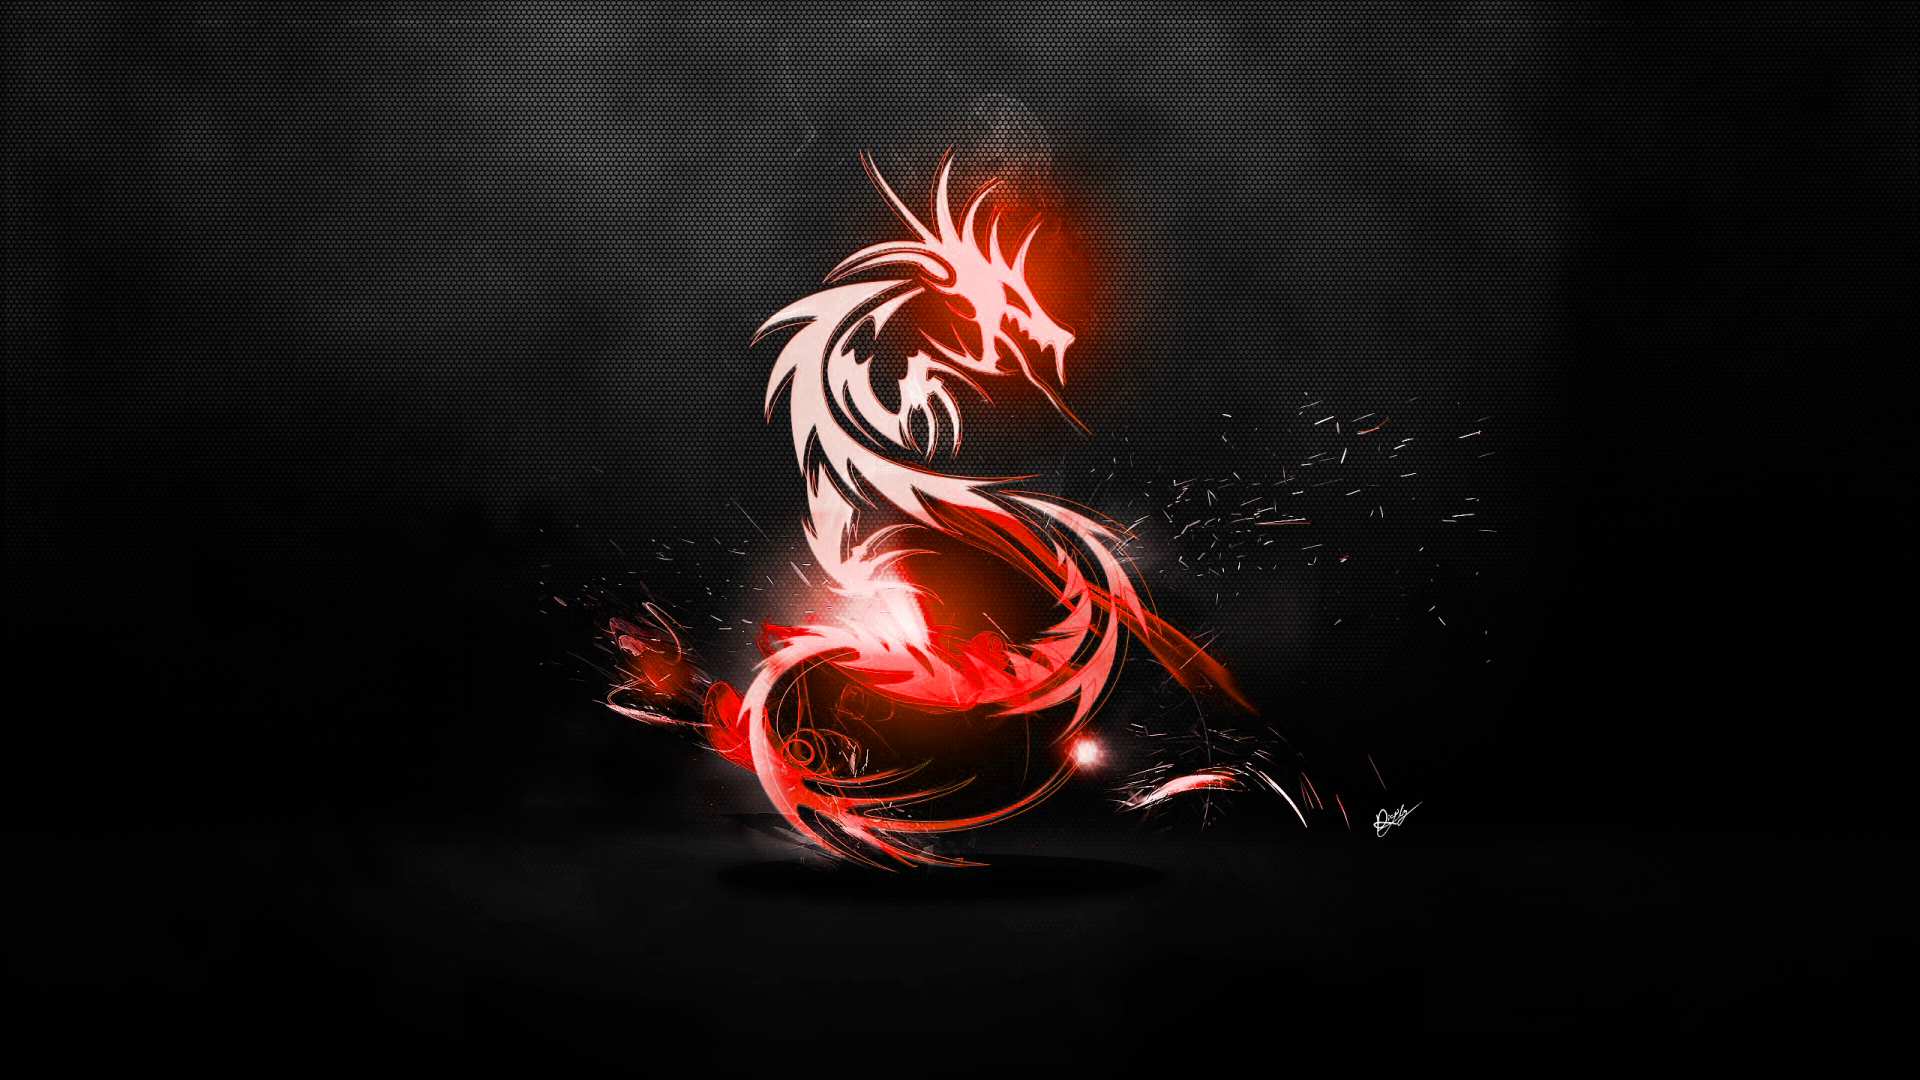 Abstract Dragon Wallpaper Red Carbon Fibre Black By